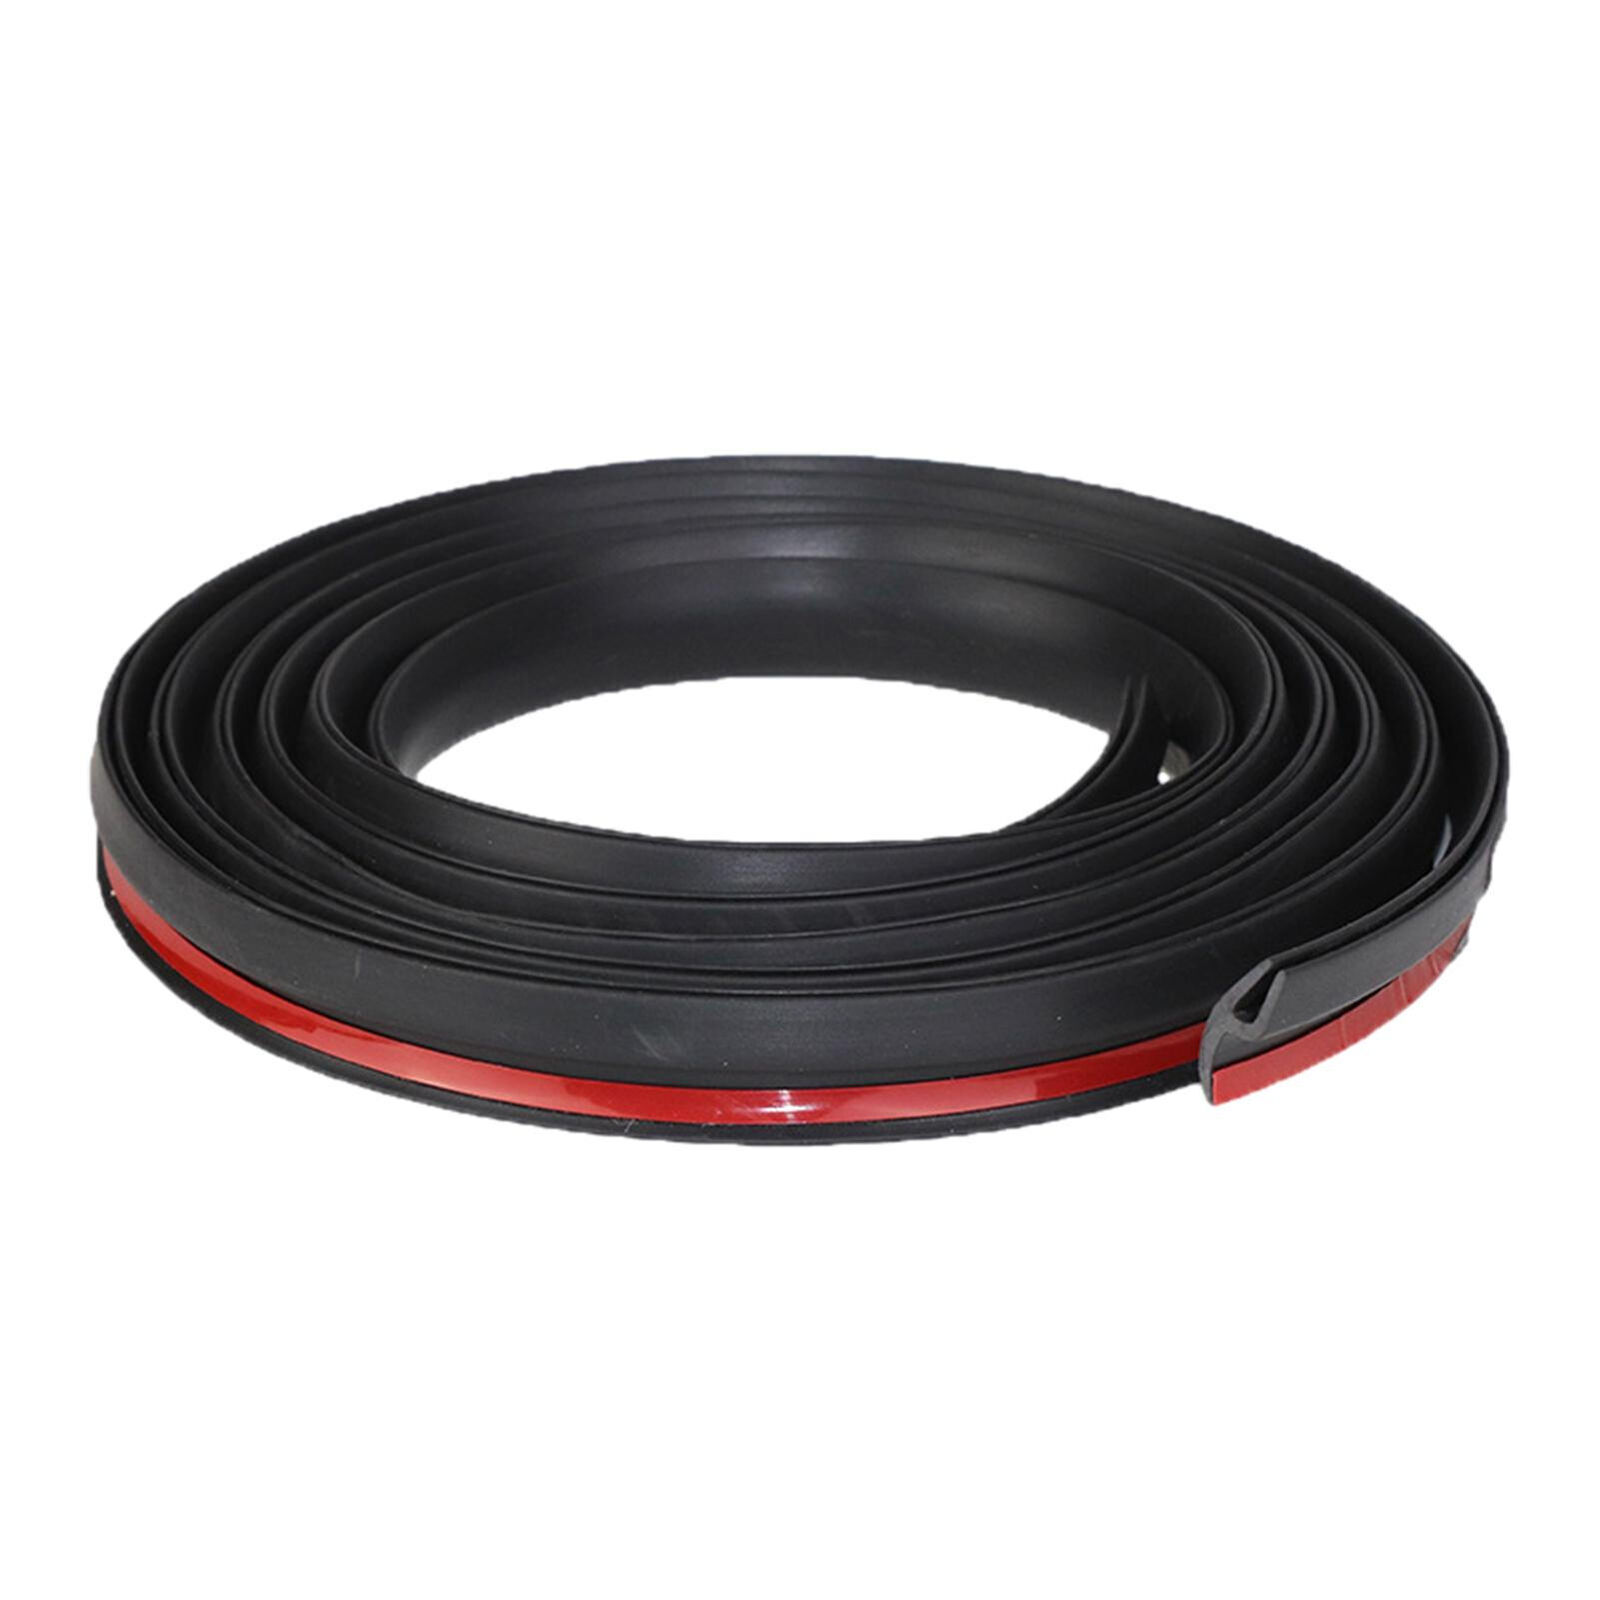 2M Rubber Car Seal Strip Weatherstrip for Windows Windshield Roof Accessories